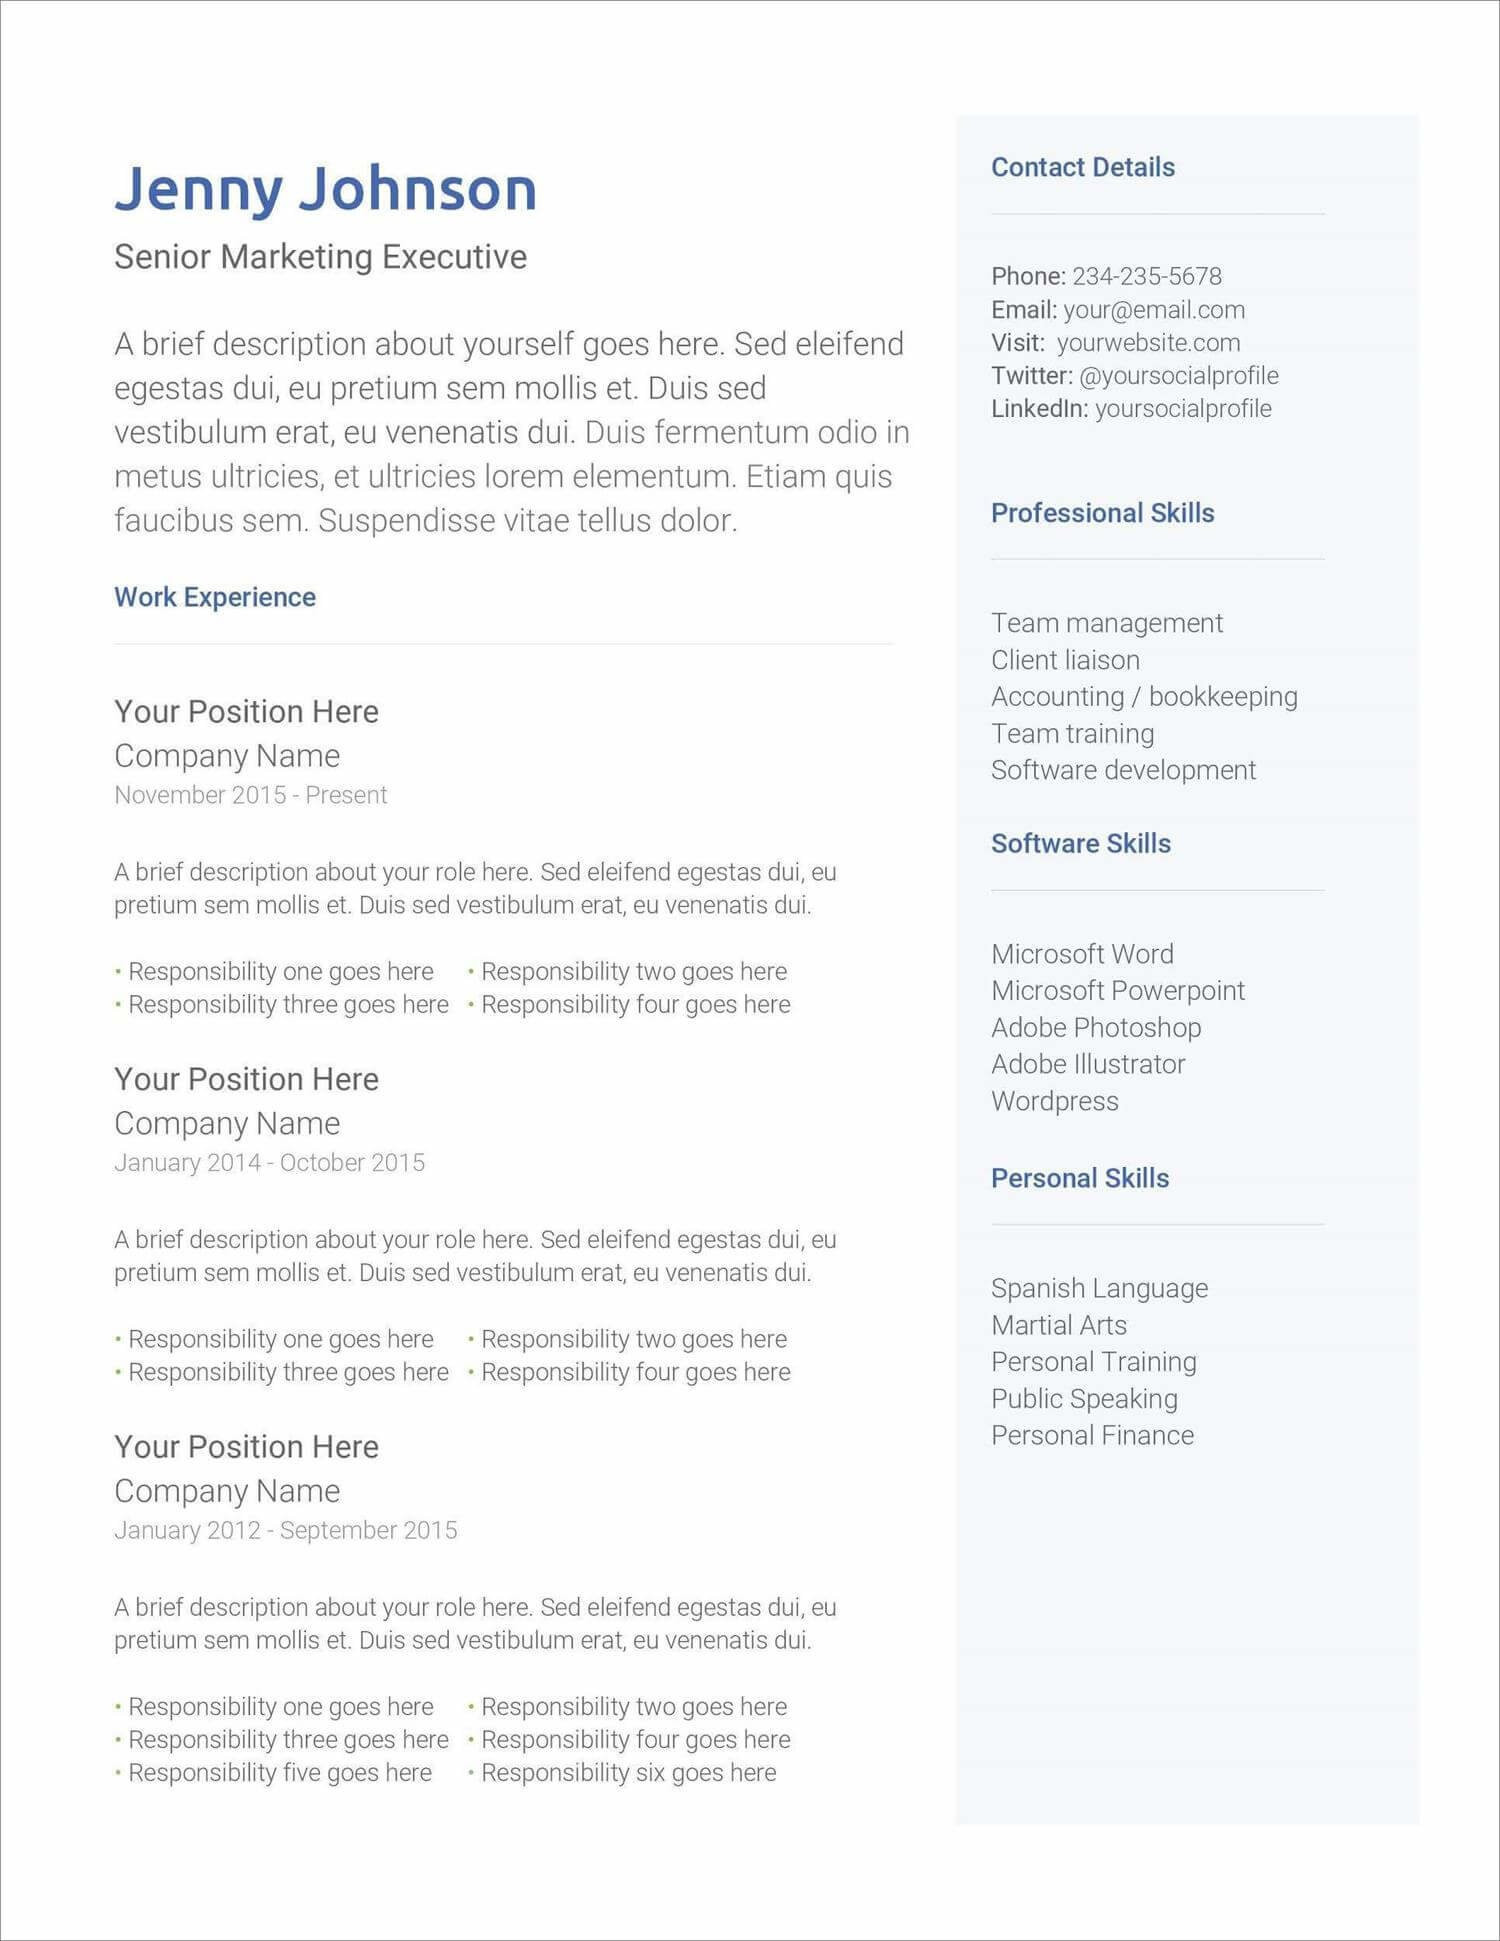 Resume Samples for Experienced Professionals Free Download 25lancarrezekiq Free Resume Templates to Download now & Fill In 2021